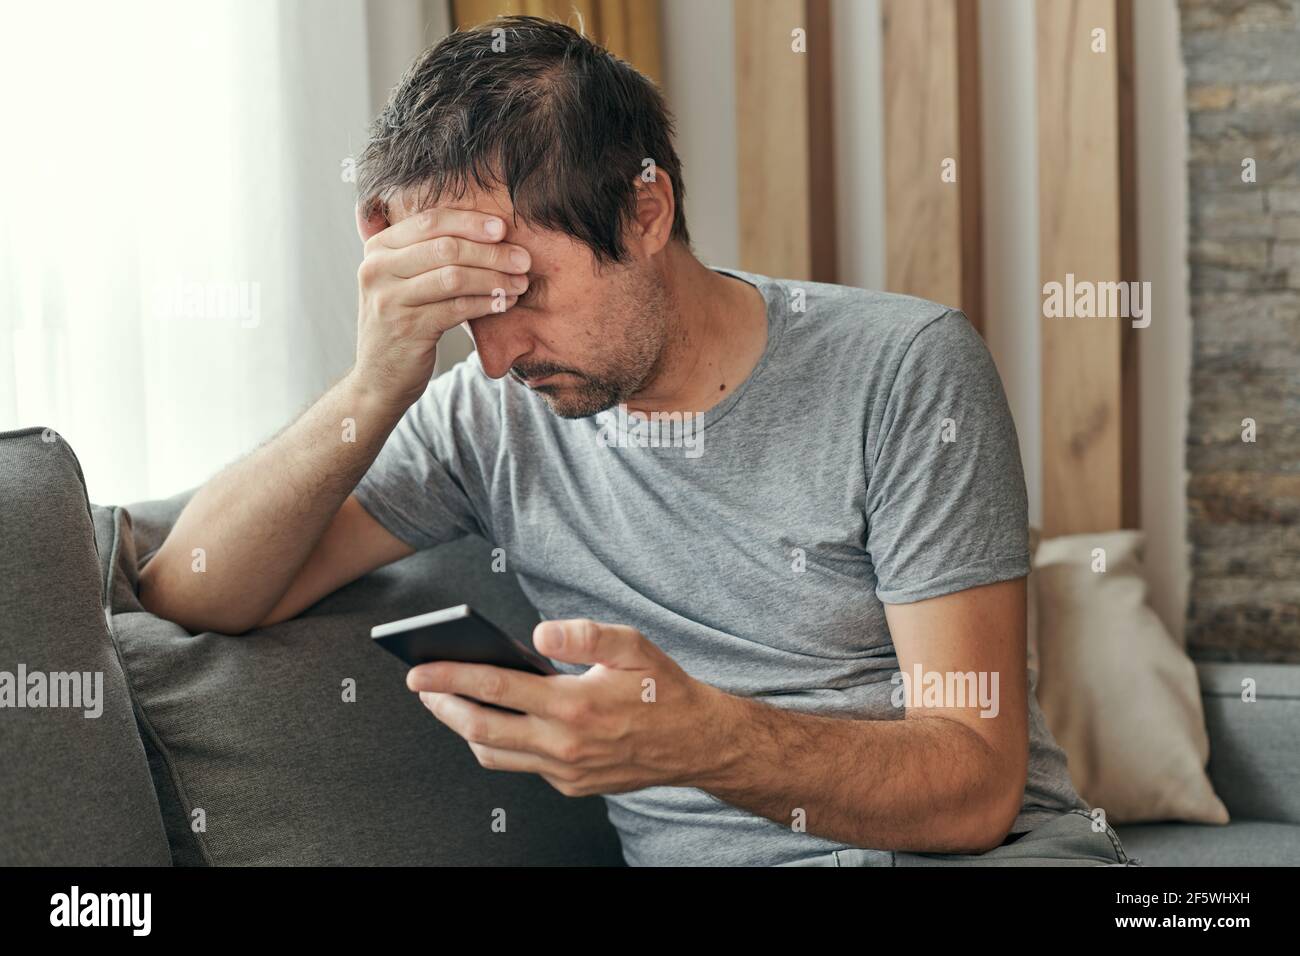 Troubled man receiving bed news in text message on mobile phone while sitting at living room sofa Stock Photo